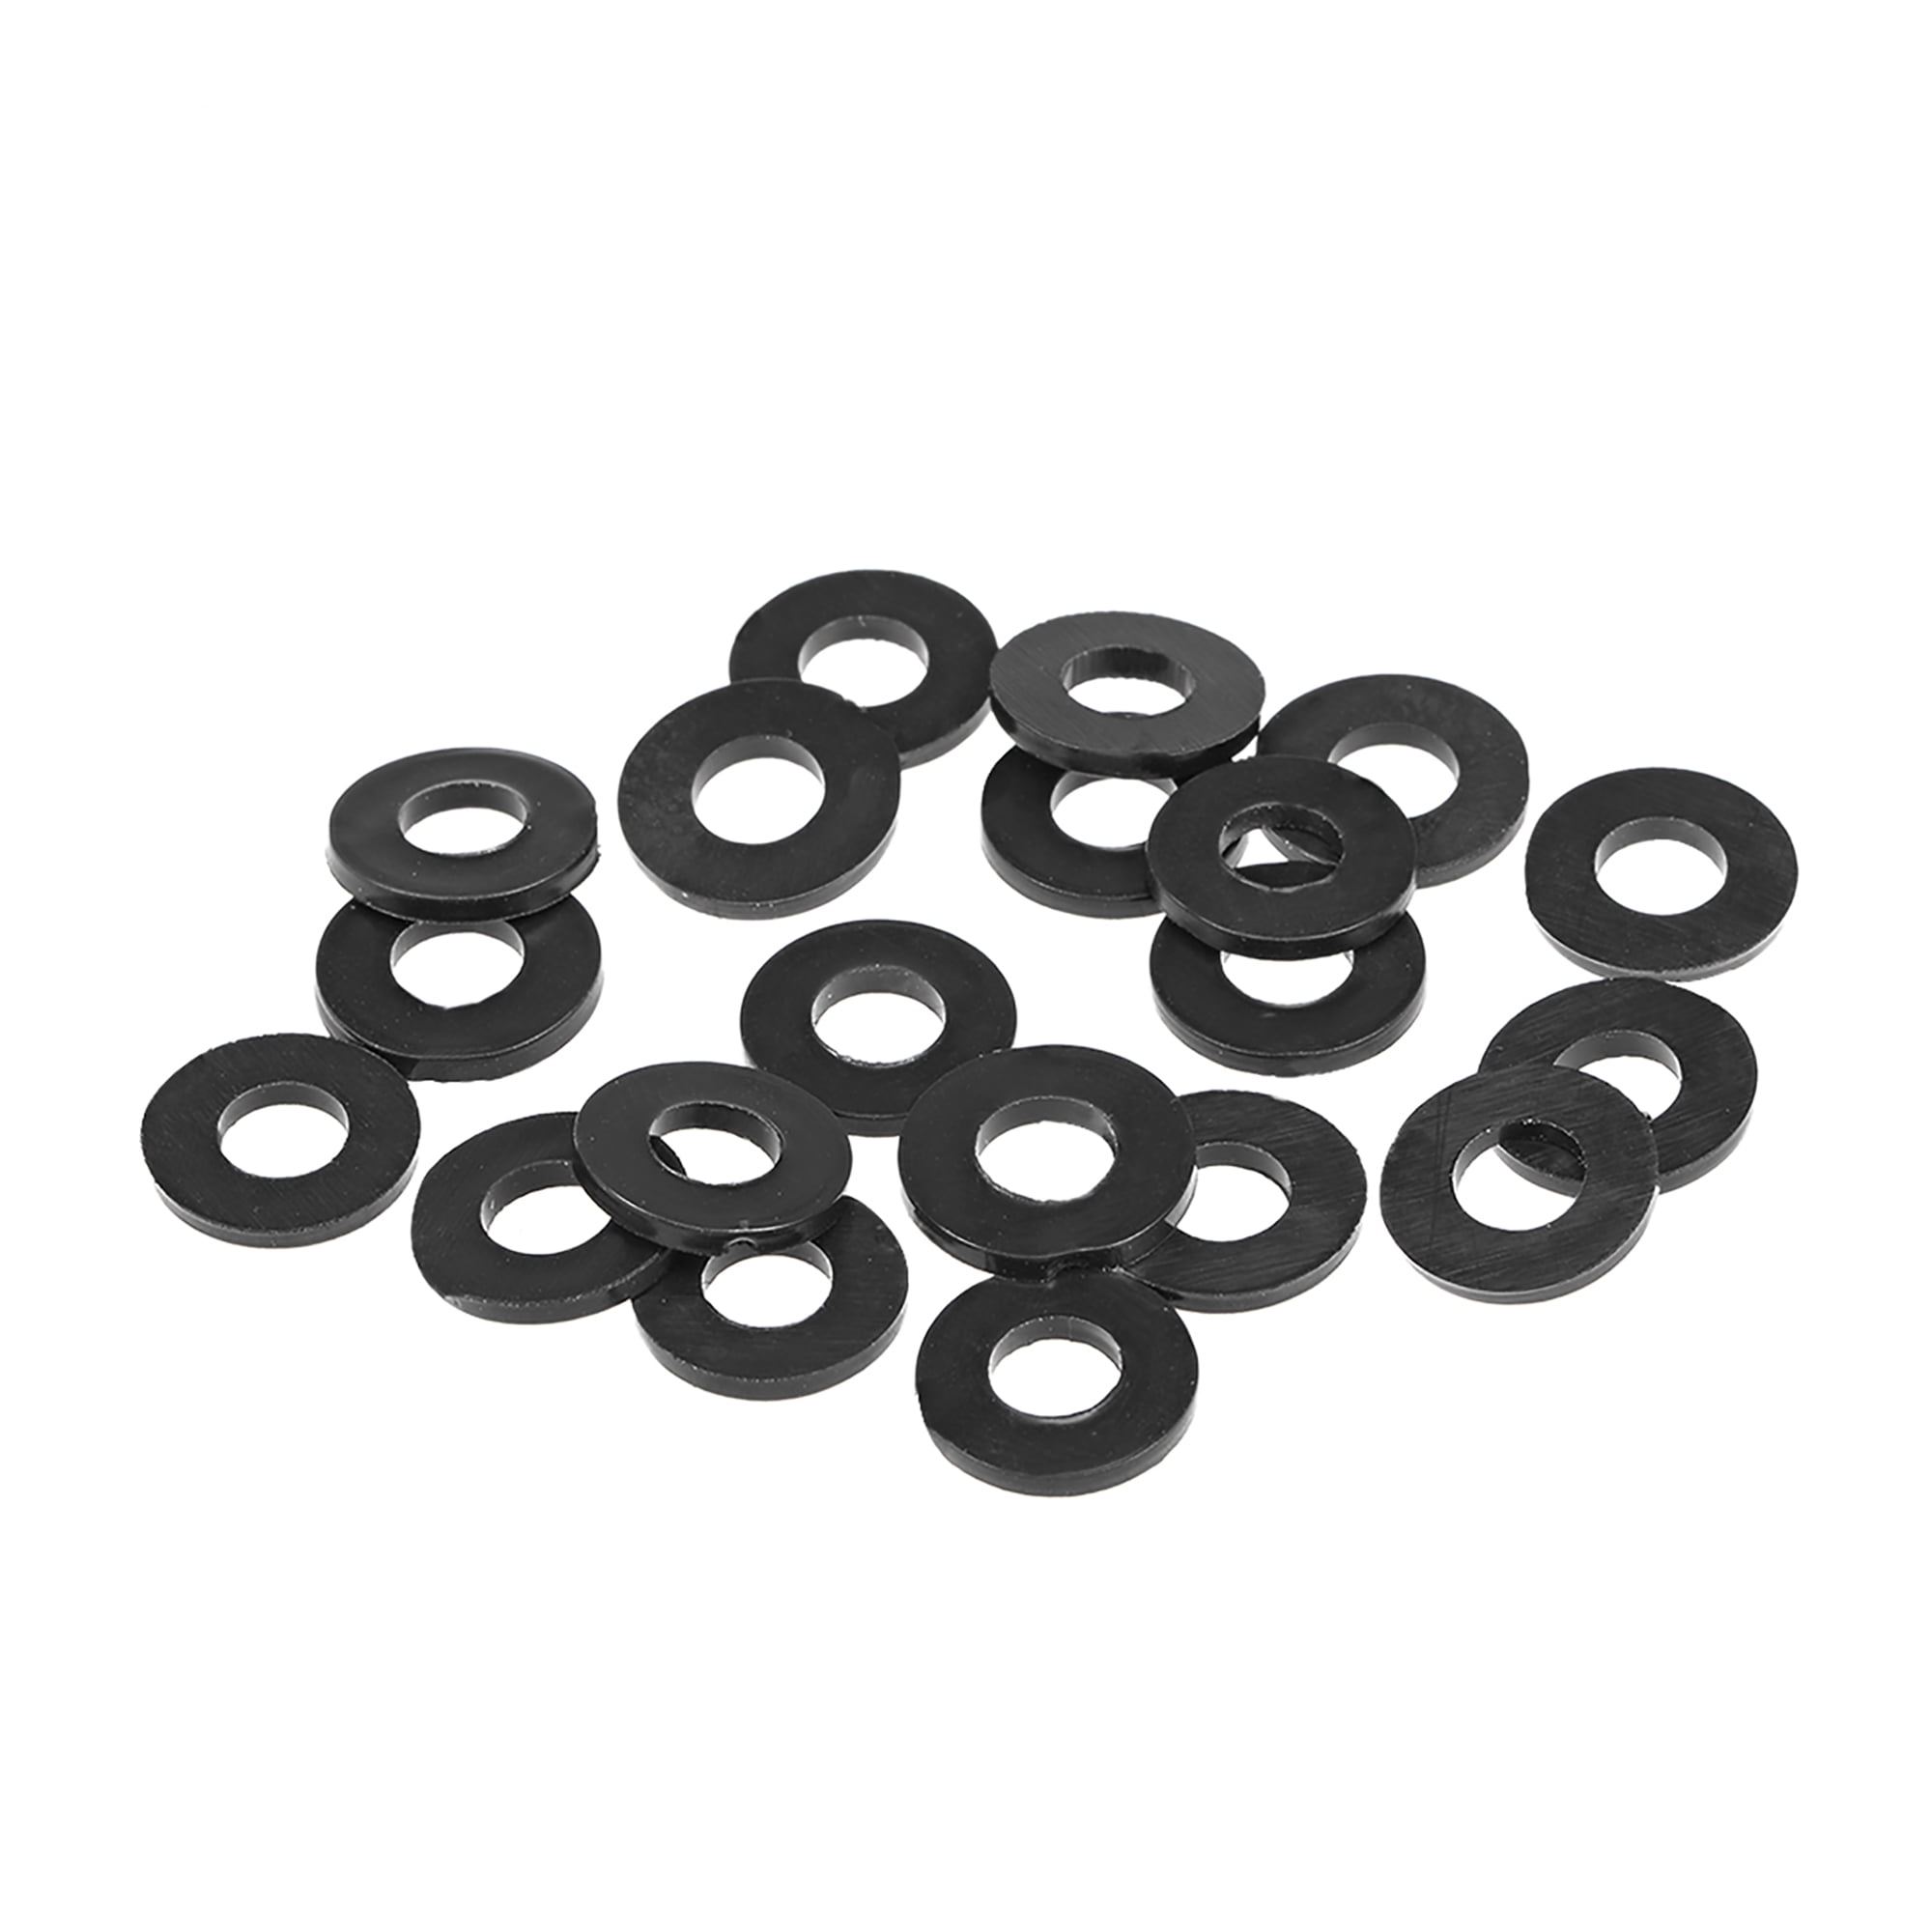 Pack of 20 uxcell Rubber Flat Washers 8mm OD 3mm ID 3mm Thickness for Faucet Pipe Water Hose